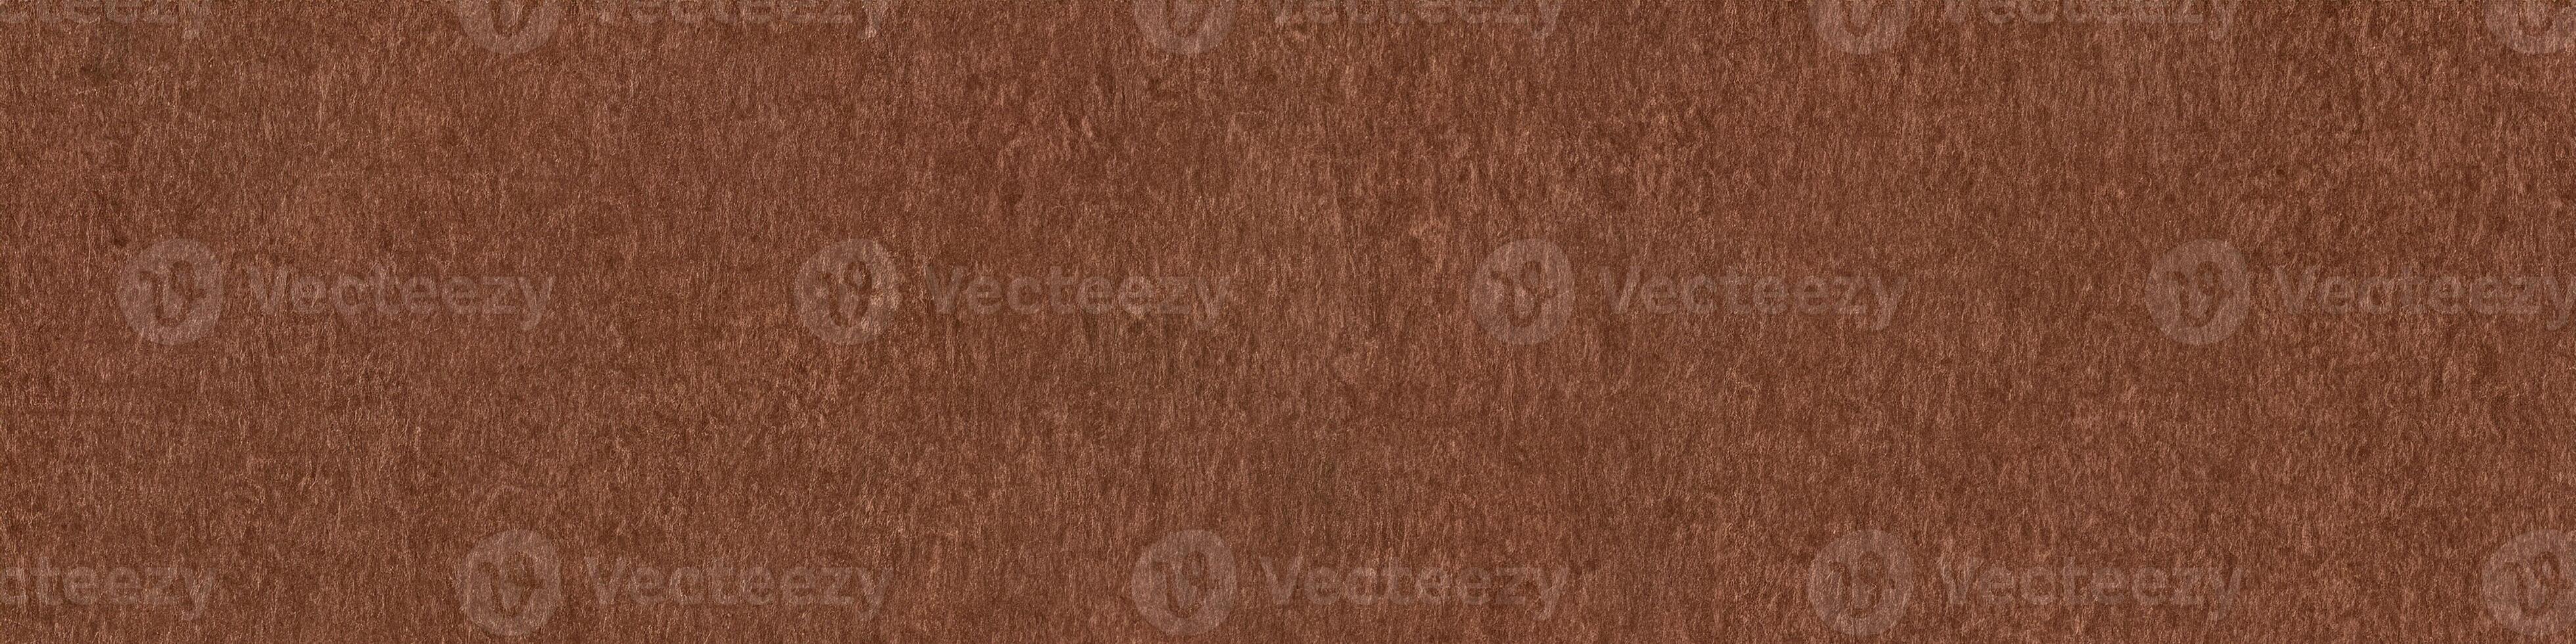 Captivating Brown Textured Background, Perfect for Artistic Projects. photo